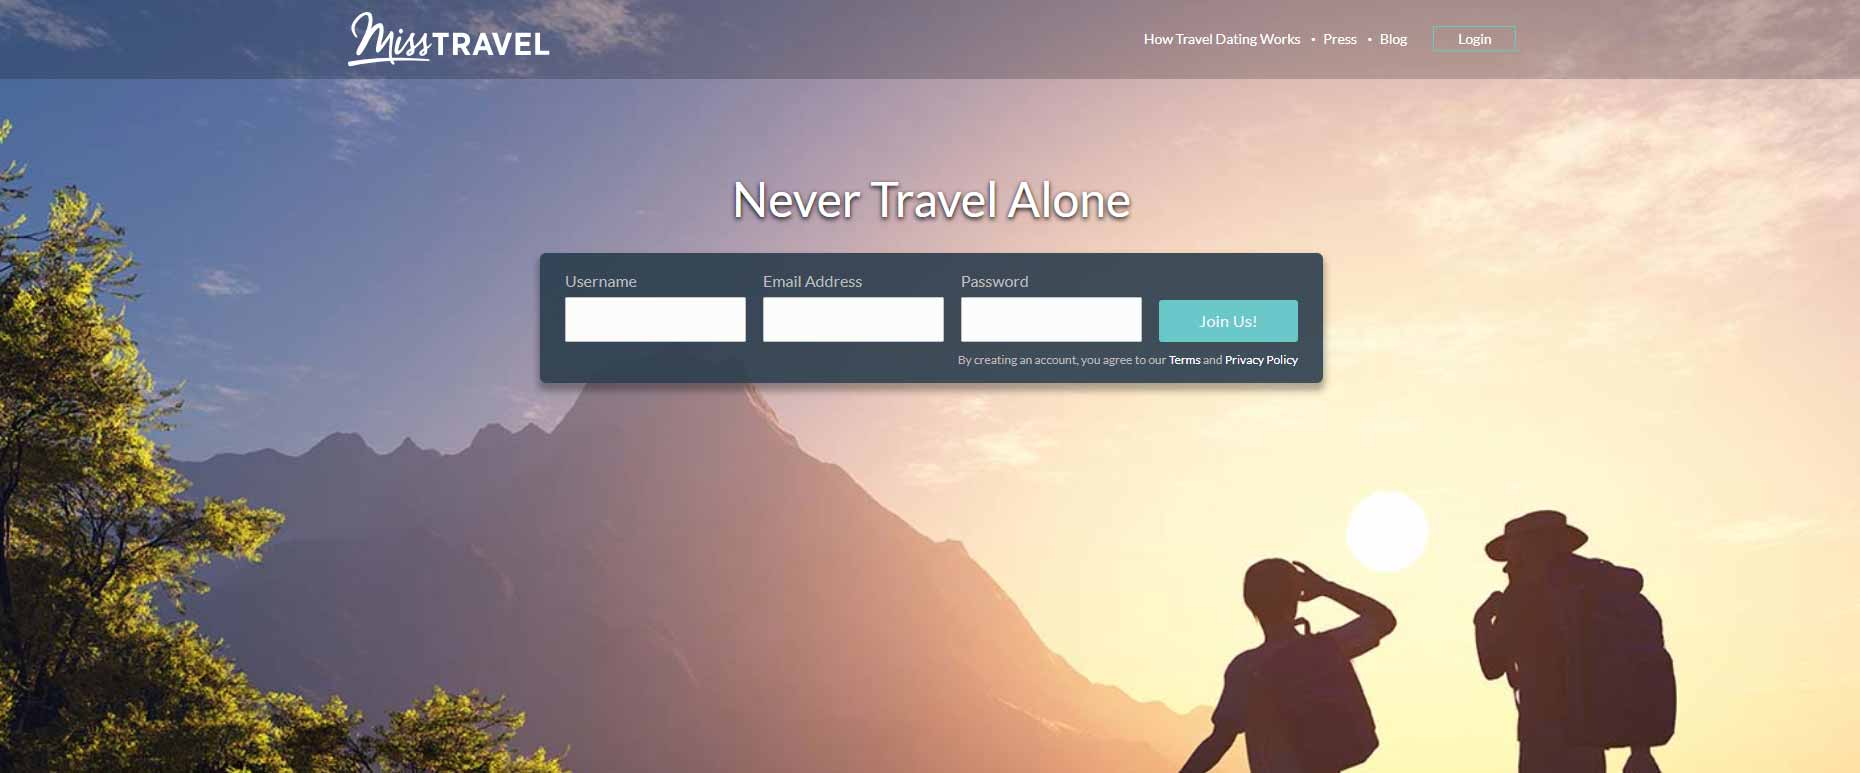 Miss Travel home page image for international travel and dating site review